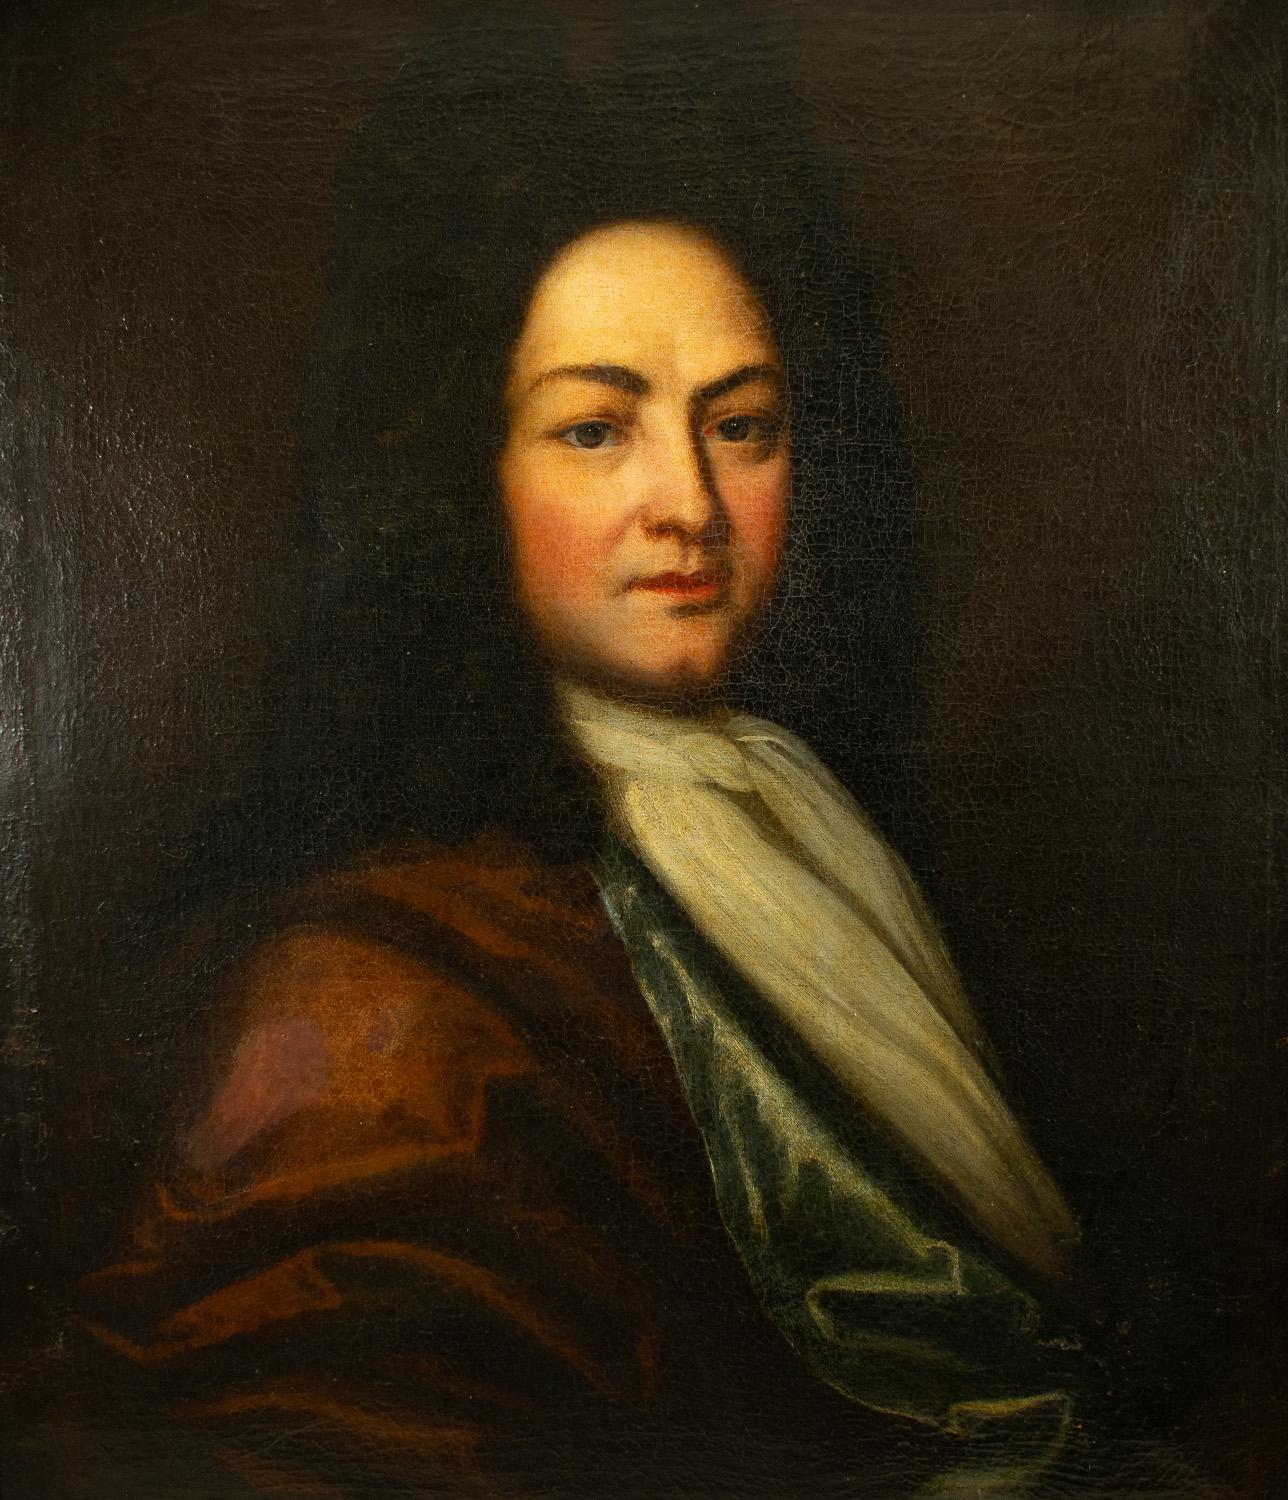 A Striking Large Portrait of a French Nobelman oil on canvas, late 17th/early 18th century.

The subject dressed in a velvet gown and white neck tie and wearing a flamboyant long black wig which was fashionable in the period.

Crackling overall and